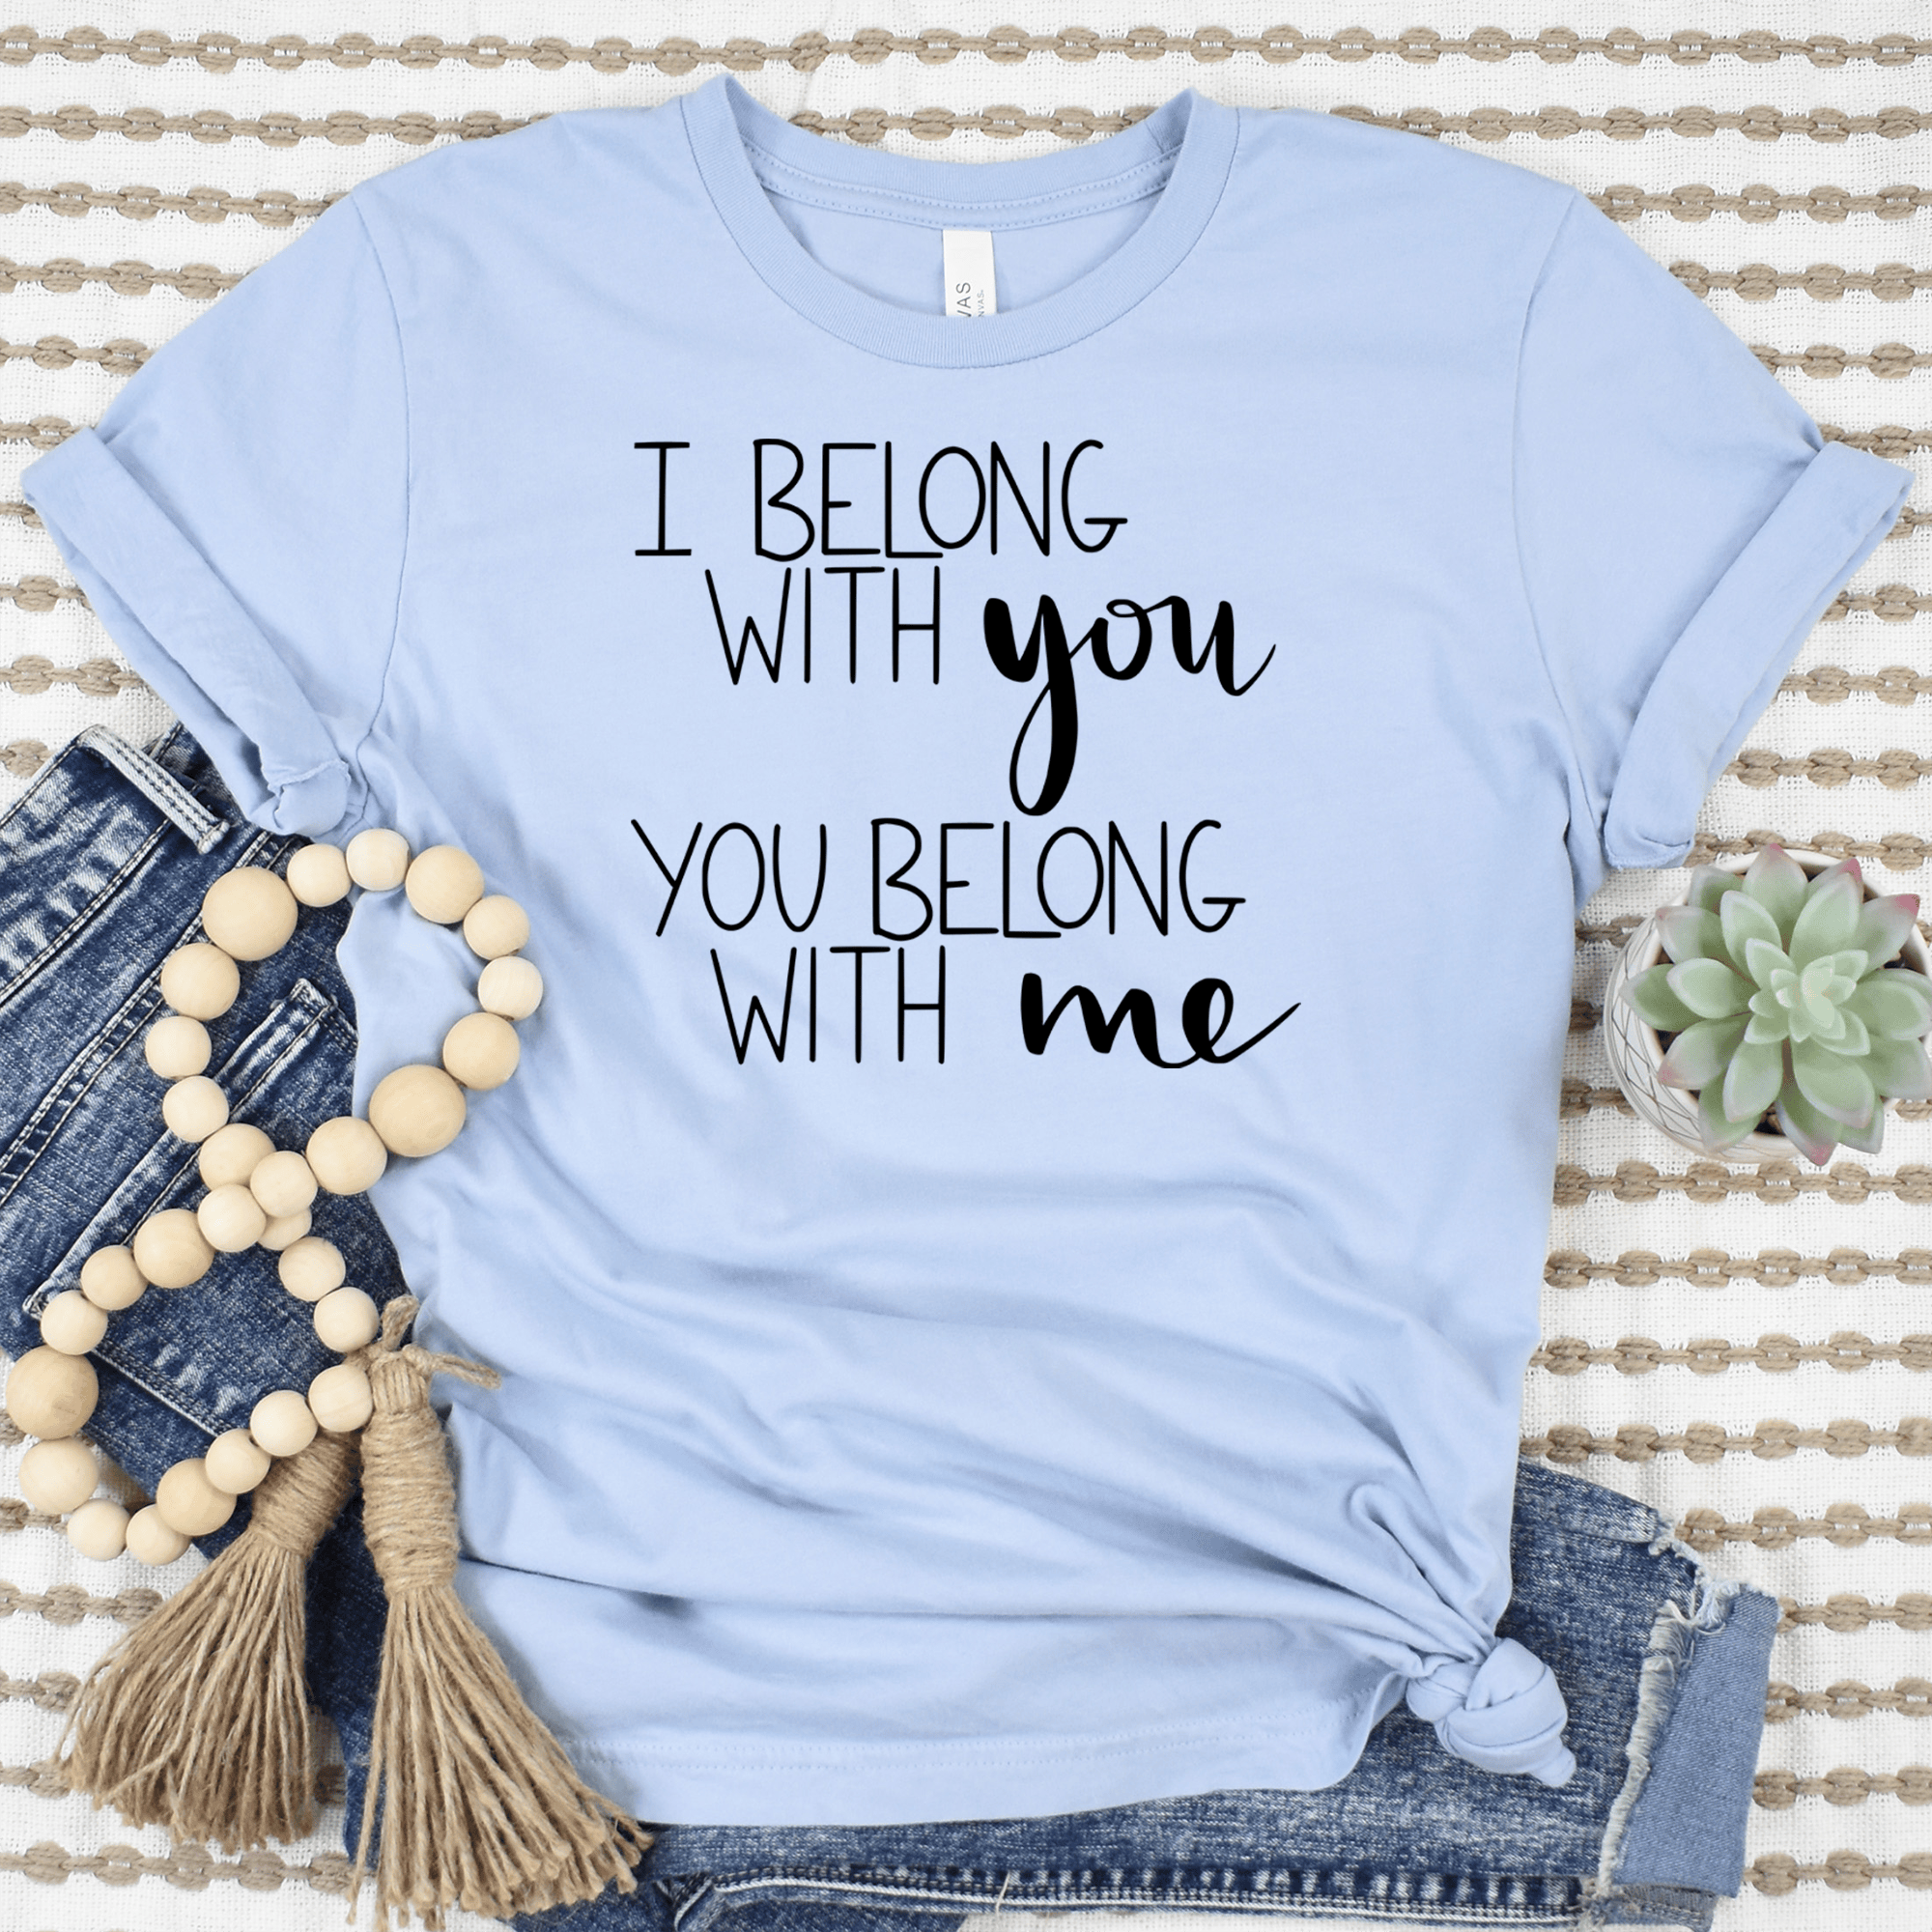 Light Blue Womens T-Shirt With I Belong With You Design